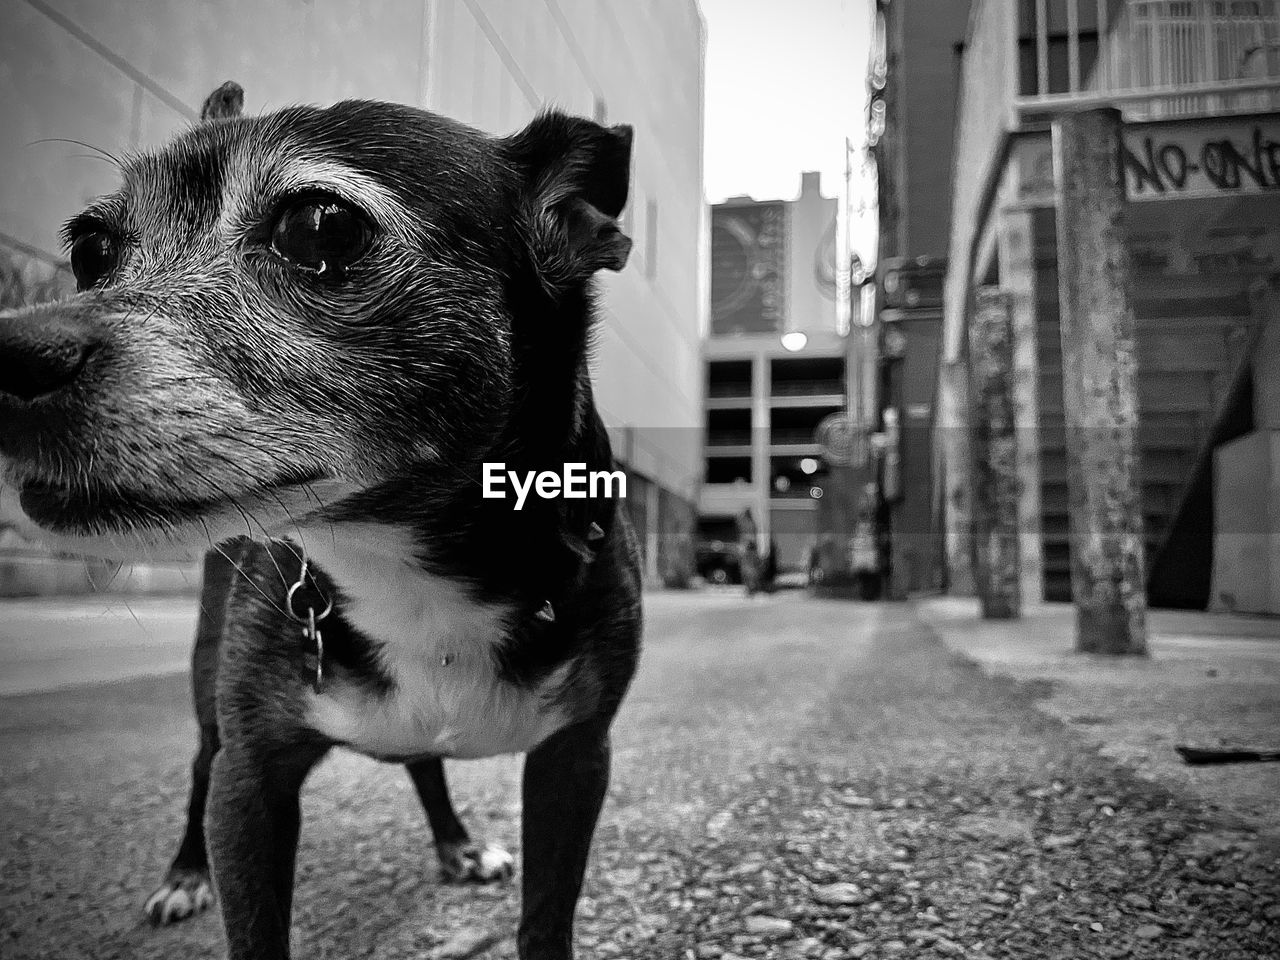 one animal, animal themes, animal, black, pet, mammal, domestic animals, canine, dog, black and white, monochrome, white, snapshot, architecture, city, no people, day, street, monochrome photography, looking, terrier, focus on foreground, looking away, built structure, building exterior, footpath, road